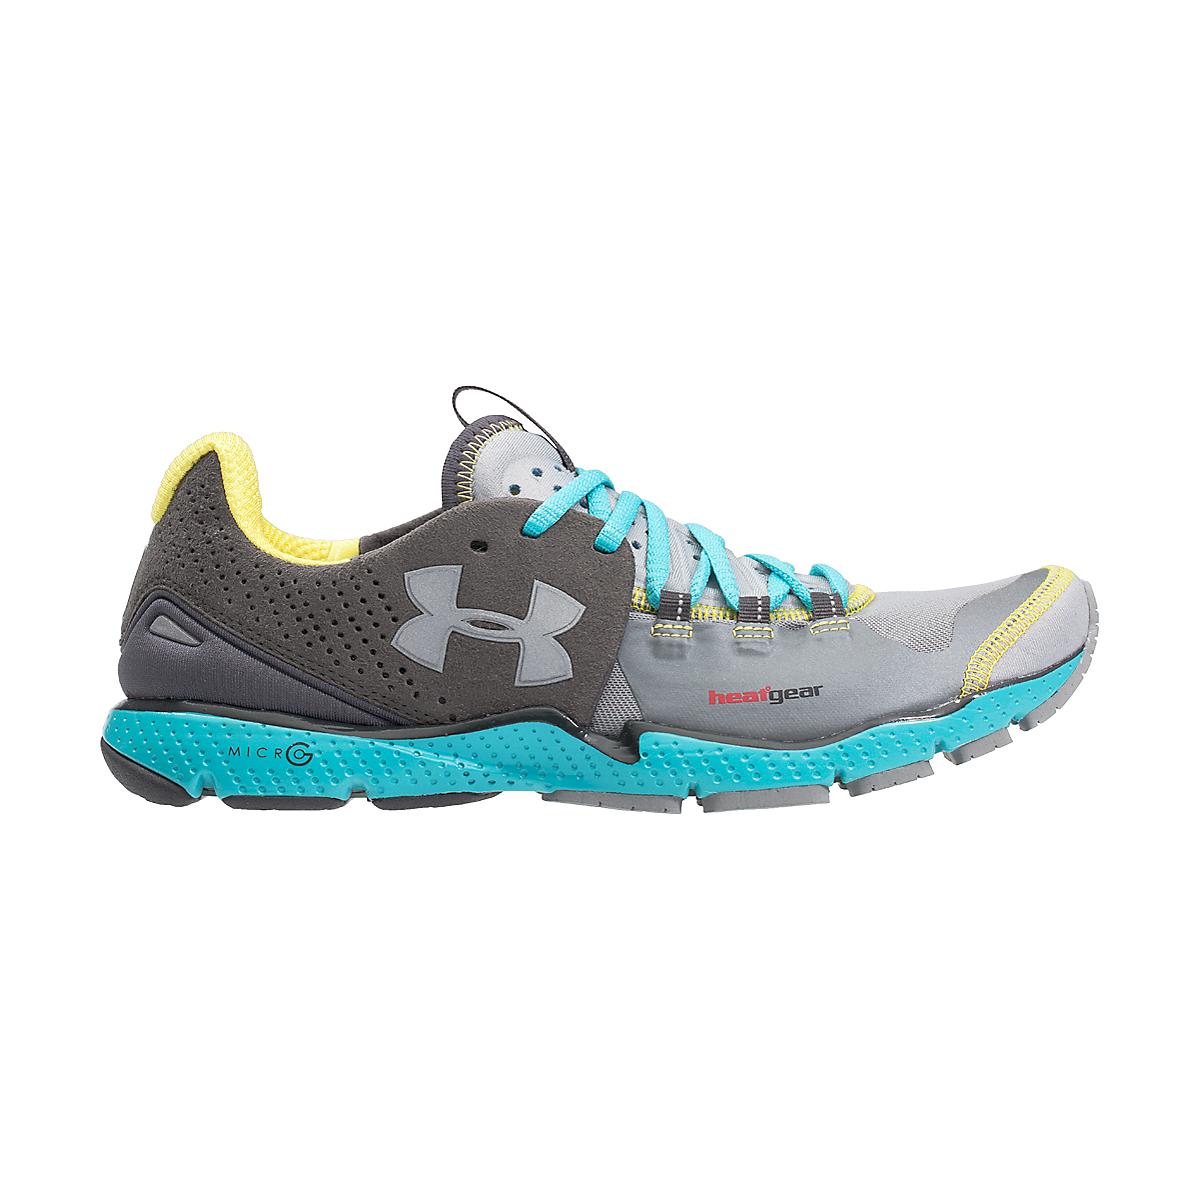 Womens Under Armour Charge RC Running Shoe at Road Runner Sports